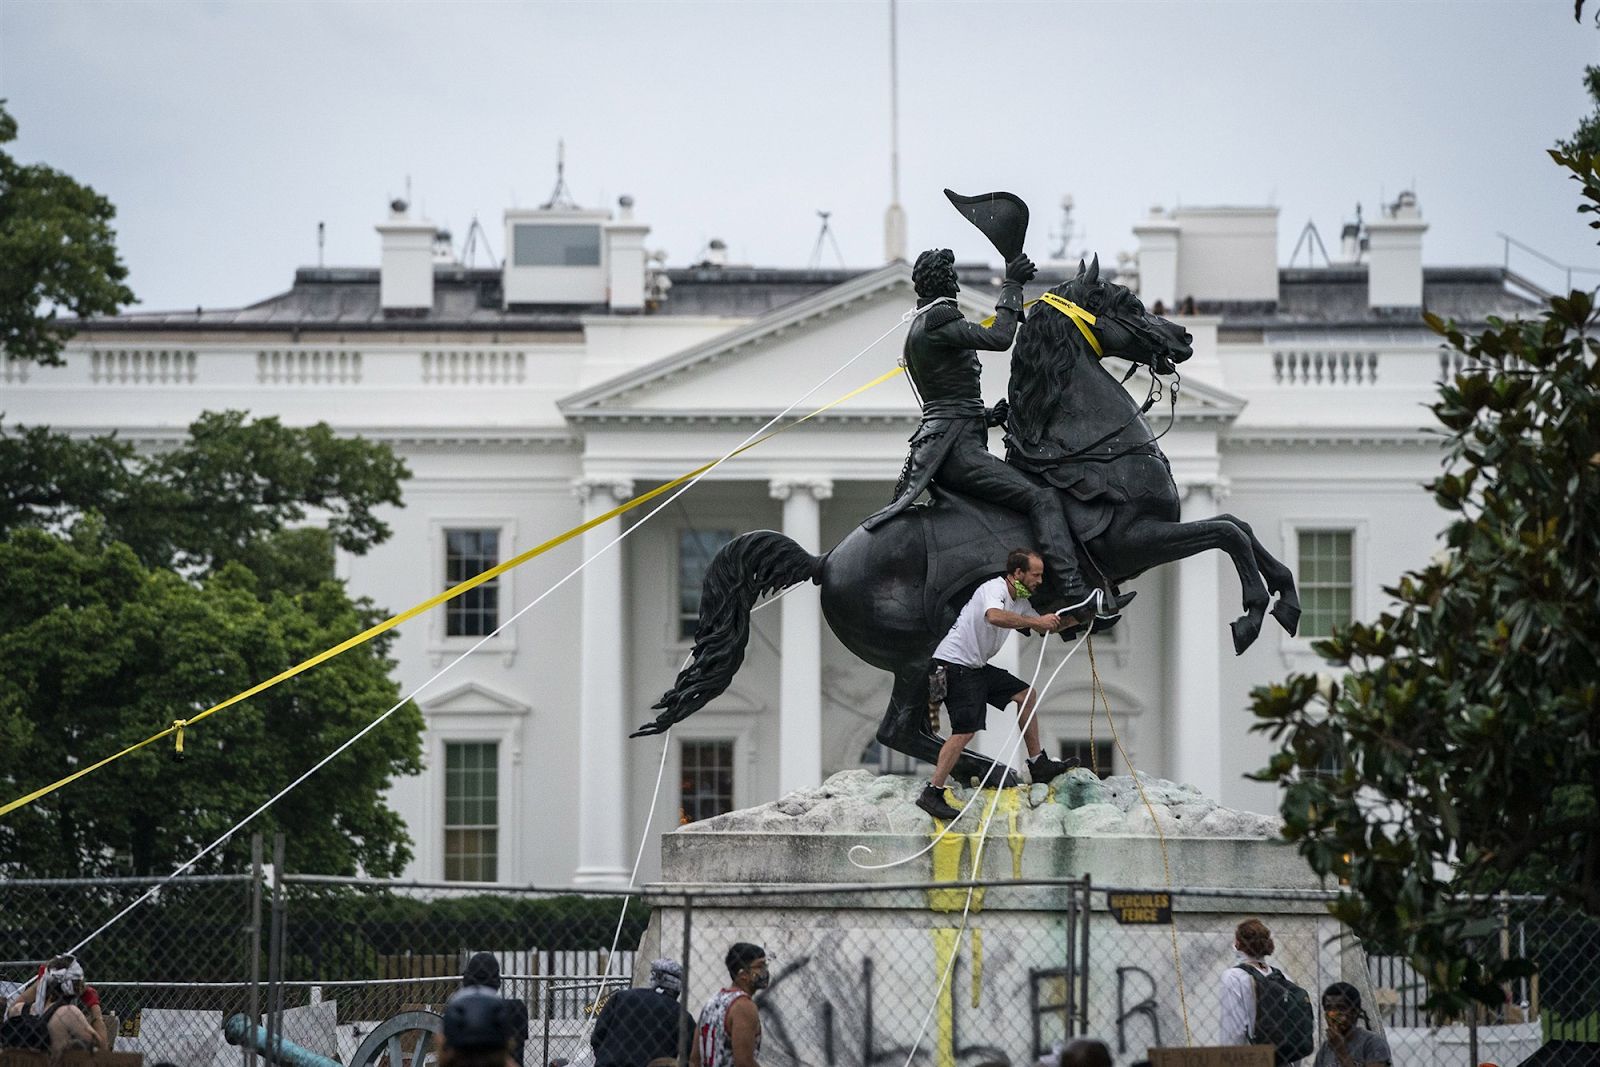 Protestors attempt to topple the statue of Andrew Jackson in Lafayette Square in June 2020. The statue still stands.